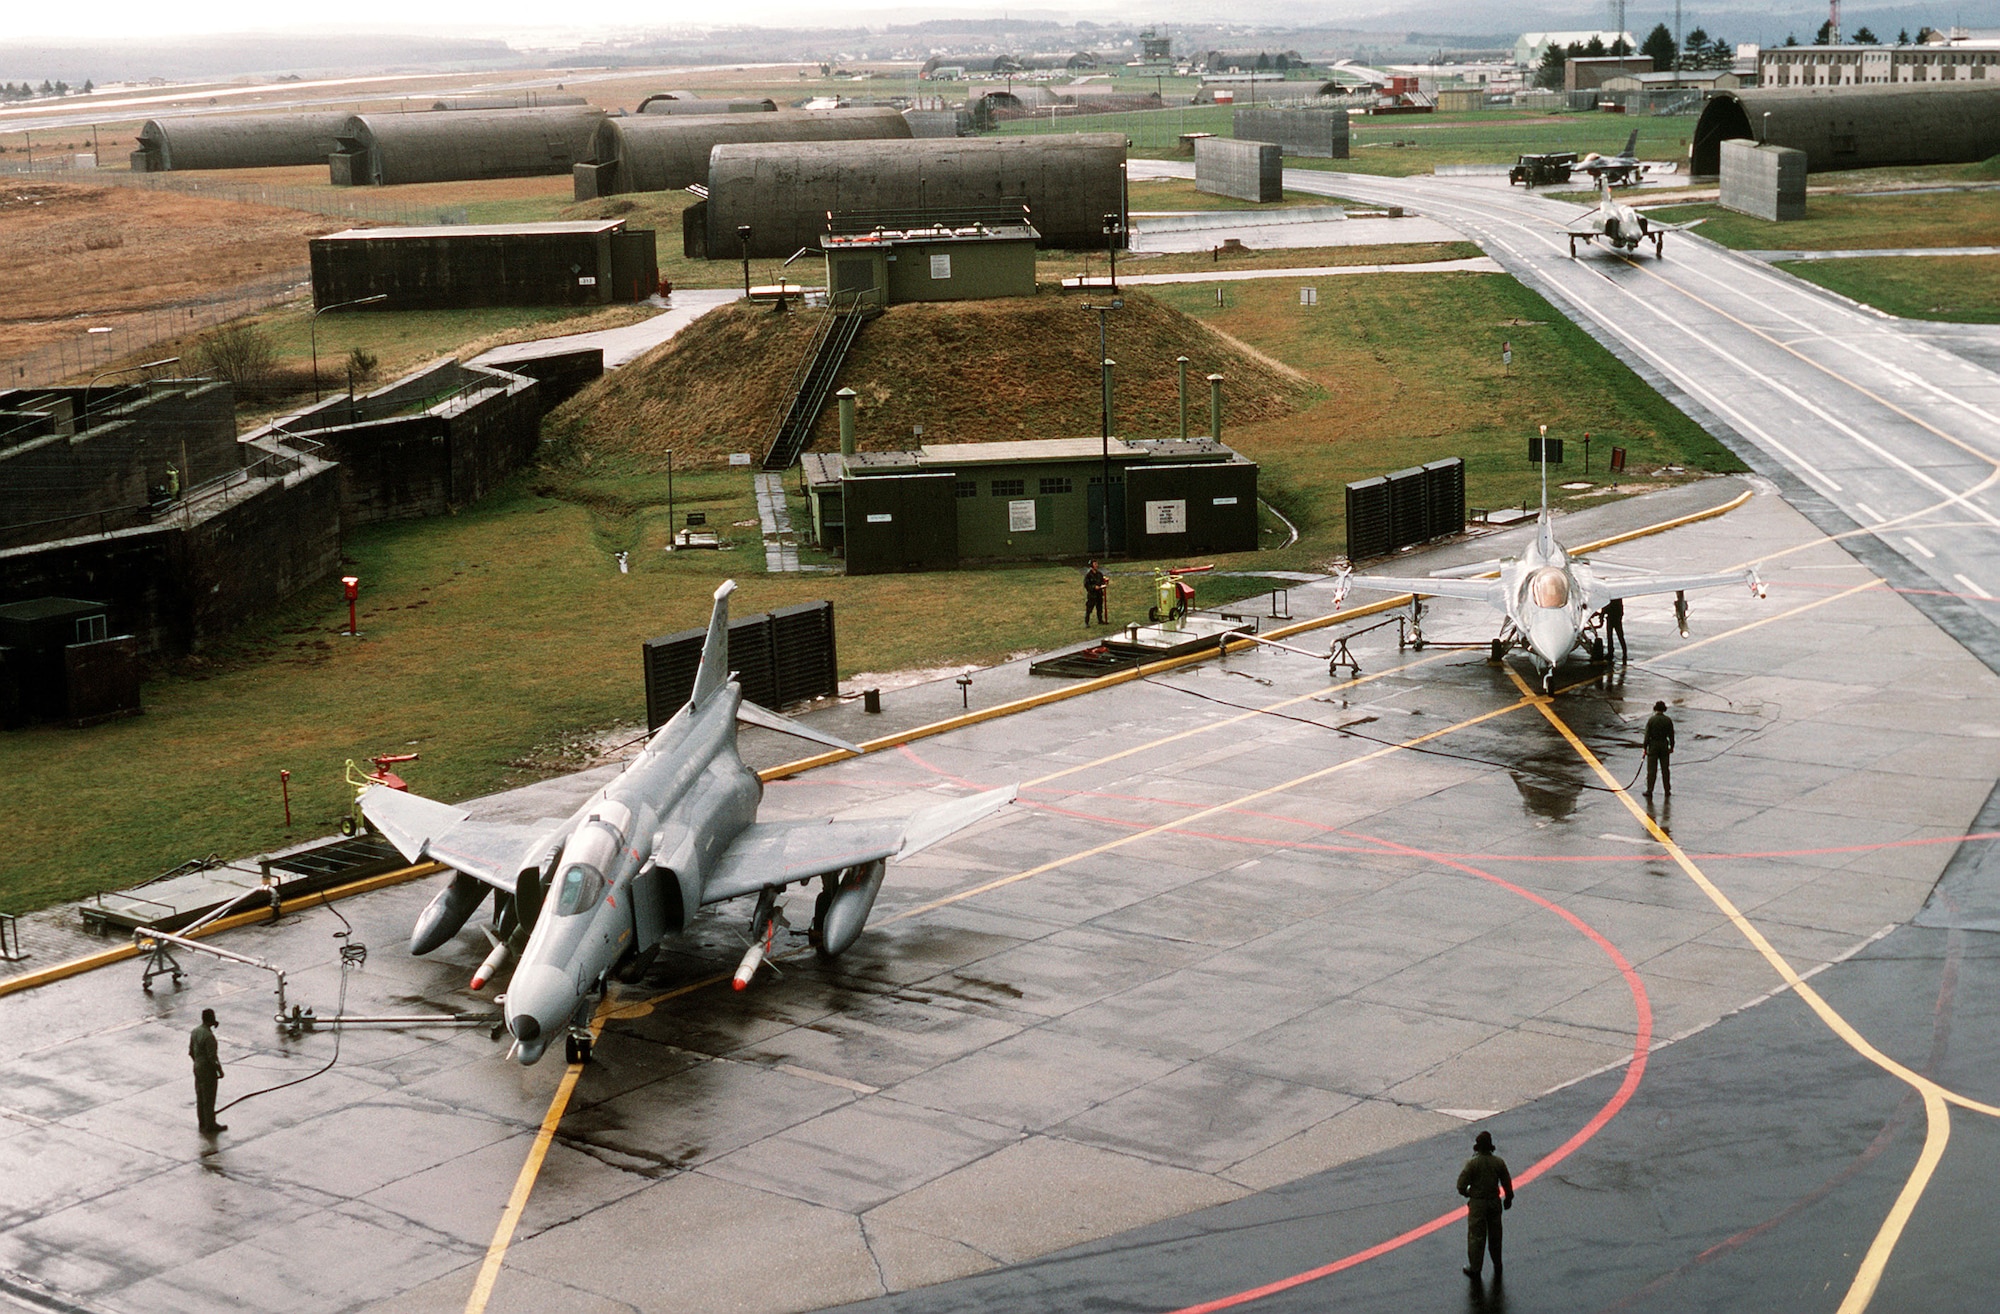 An F-4G Wild Weasel fighter (foreground) and an F-16 Fighting Falcon are serviced on the flight line prior to departing for Saudi Arabia during Operation Desert Shield. (U.S. Air Force photo/Tech. Sgt. Fernando Serna)